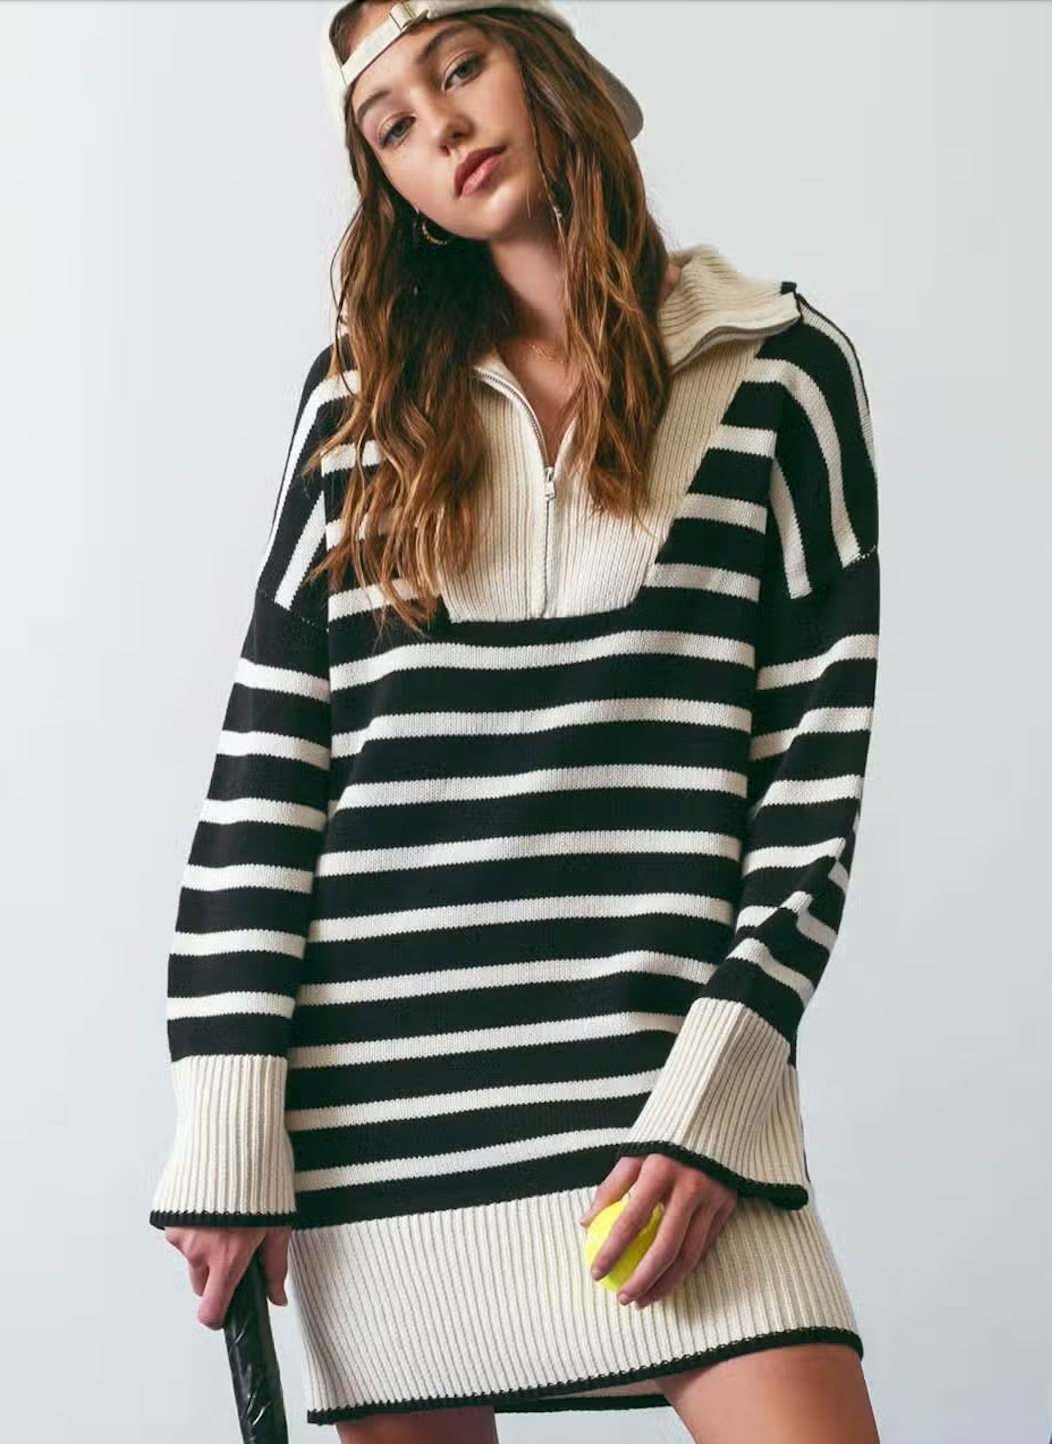 Stripped Collared Knit Sweater Dress